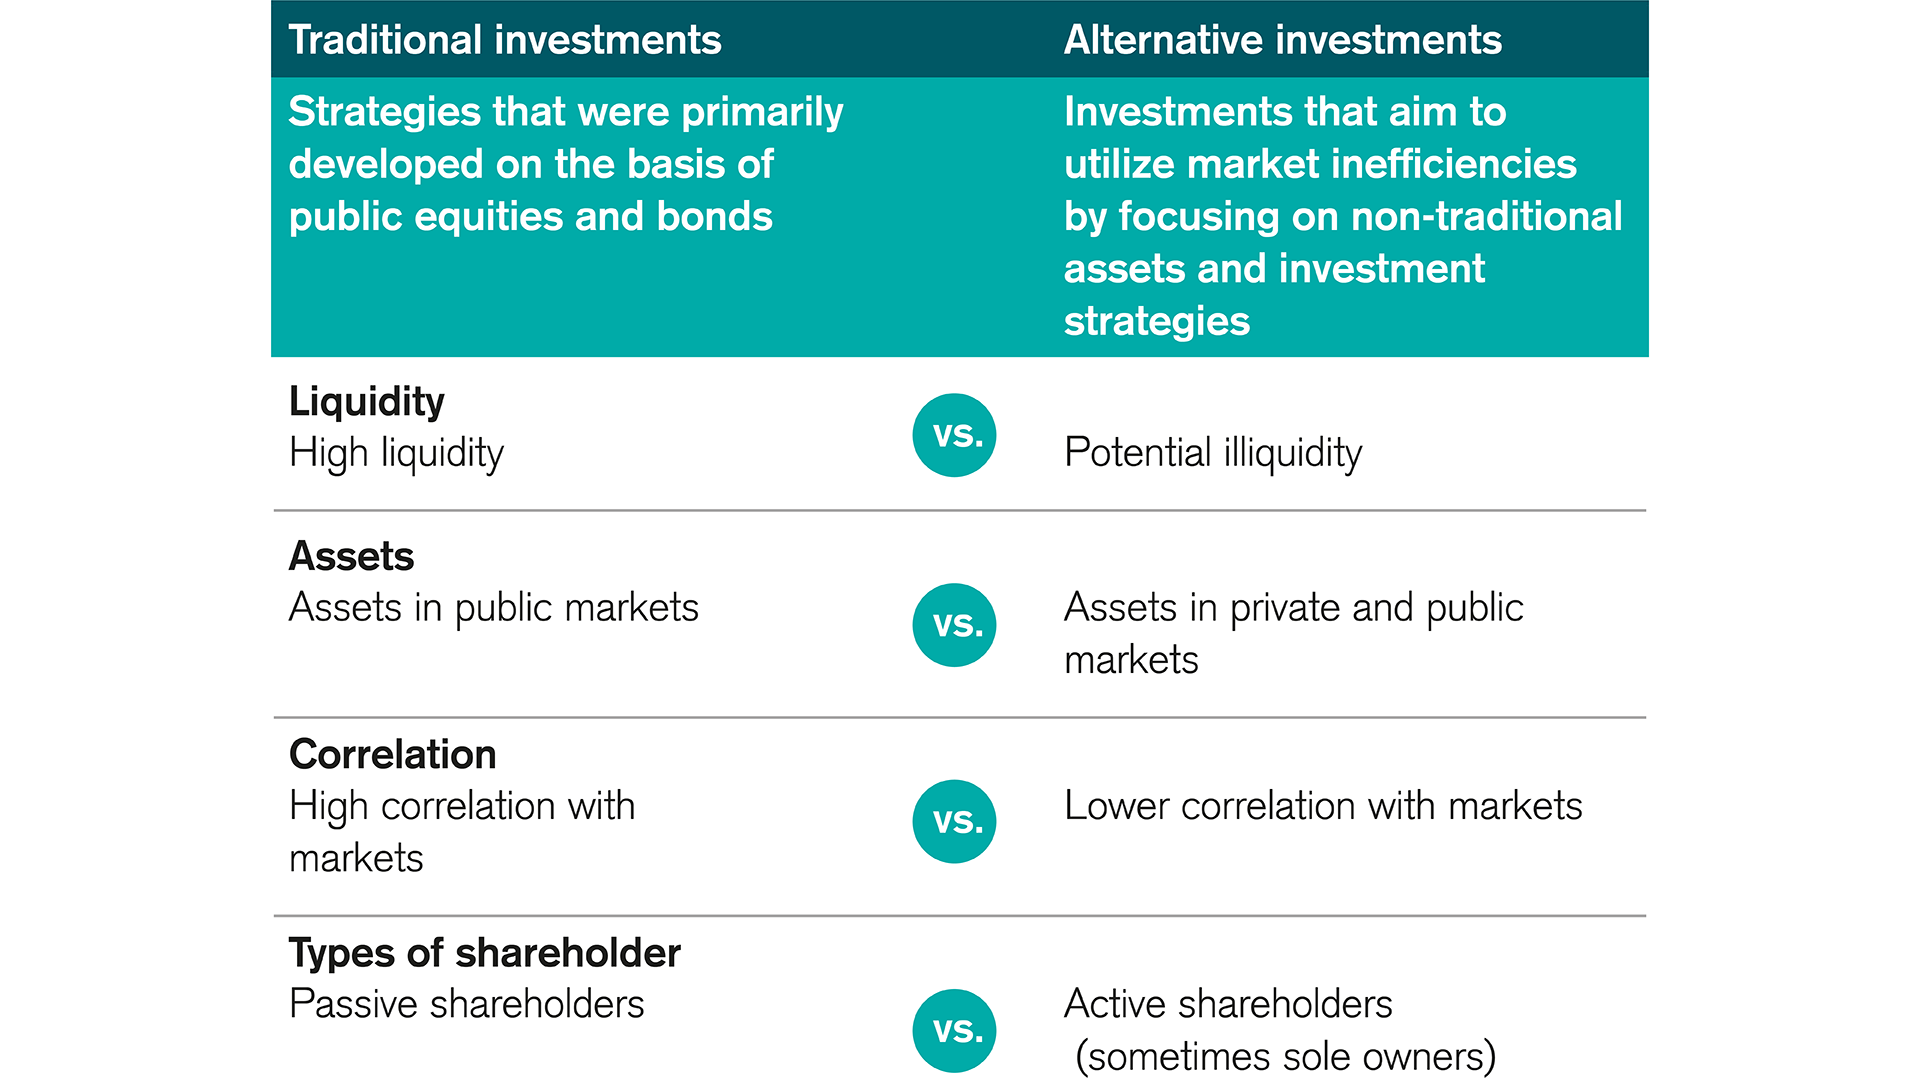 Traditional investments compared to alternative investments